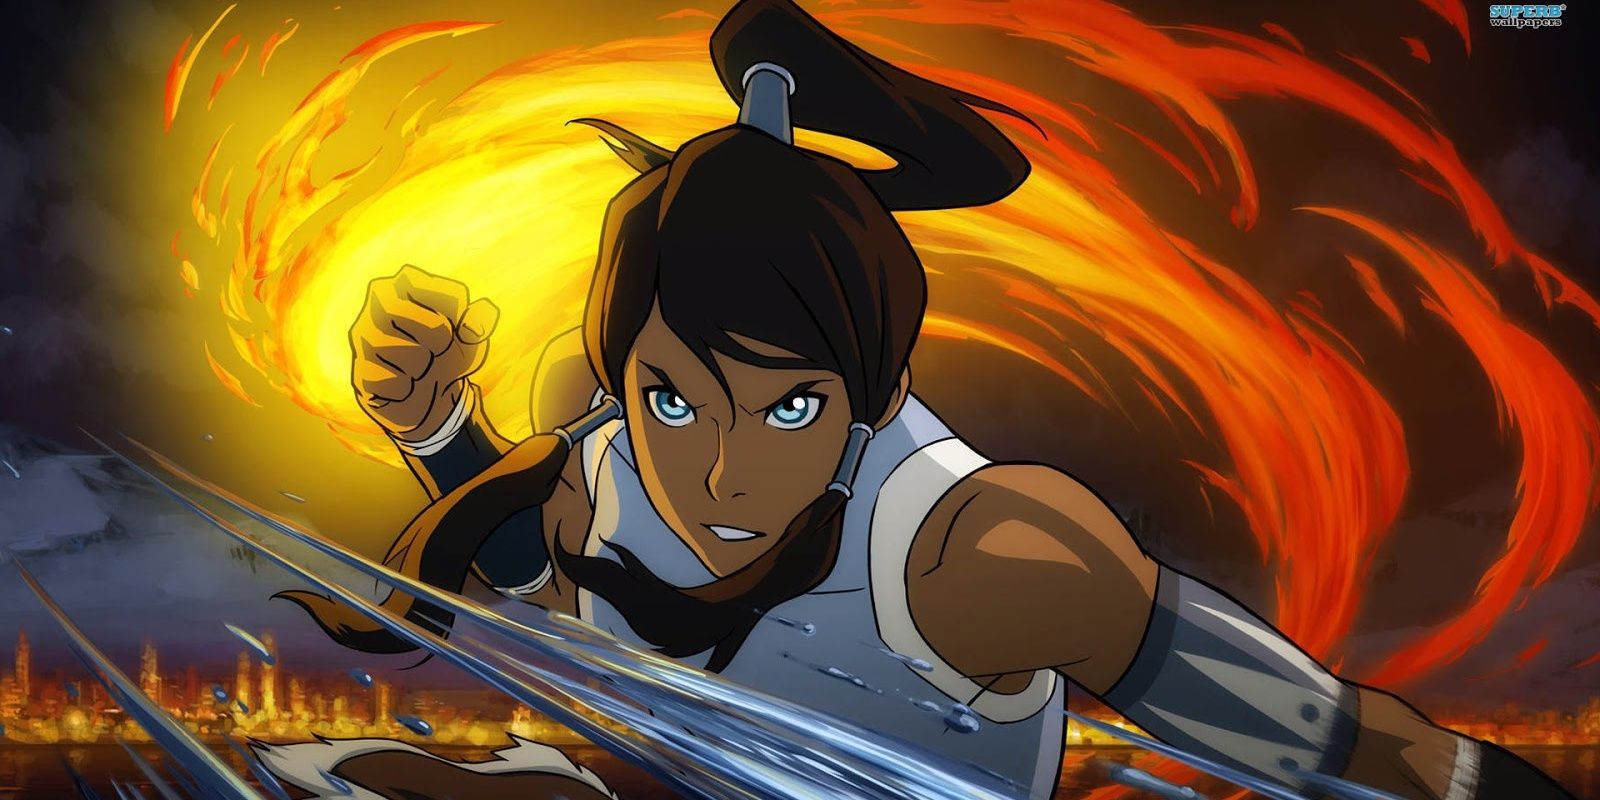 Review The Legend of Korra anime  Self Taught Japanese